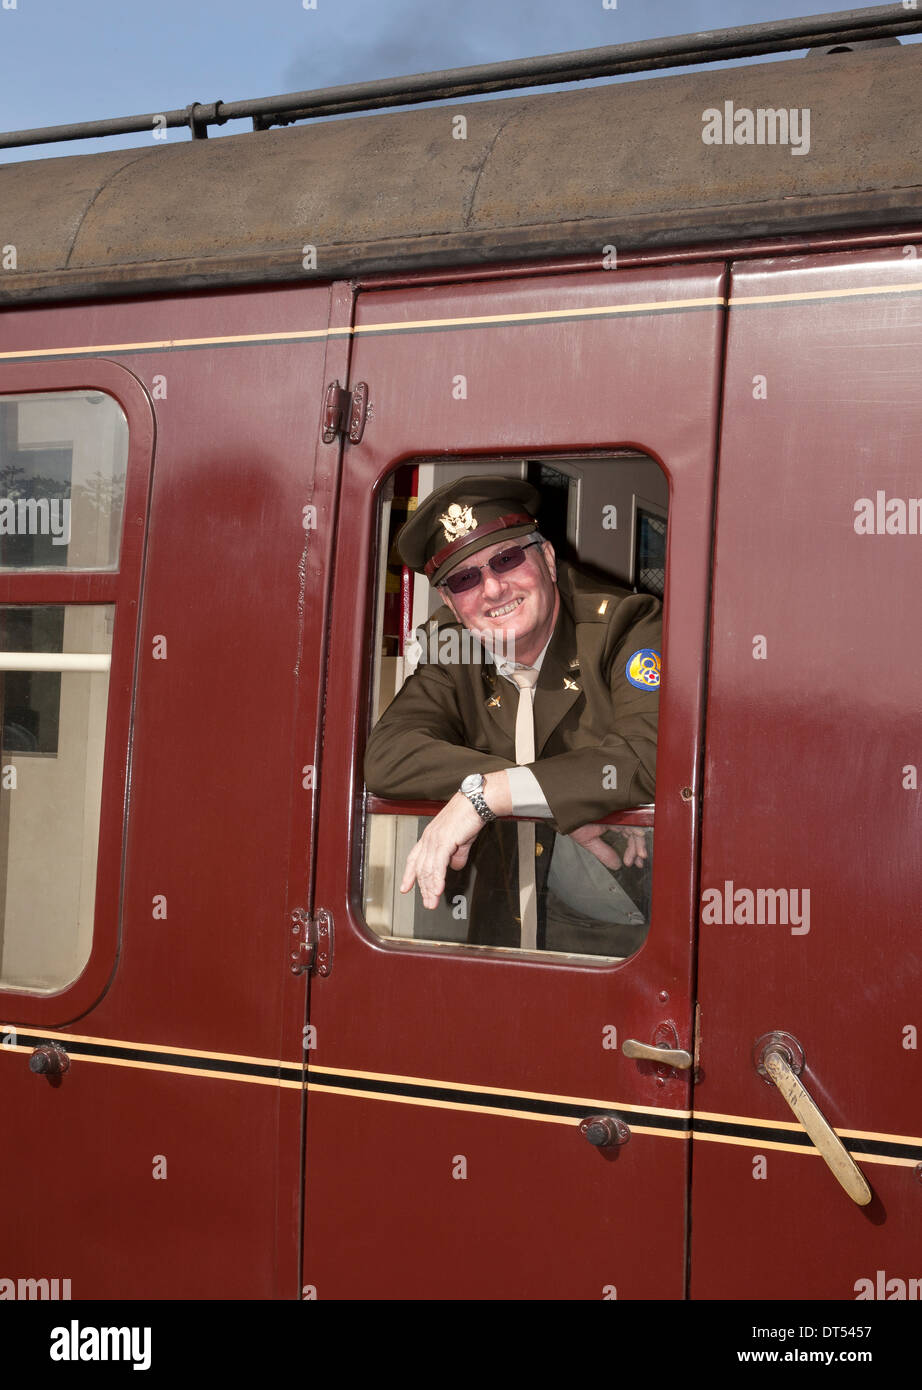 A man leaning out of a train window in 1940's Military uniform Stock Photo